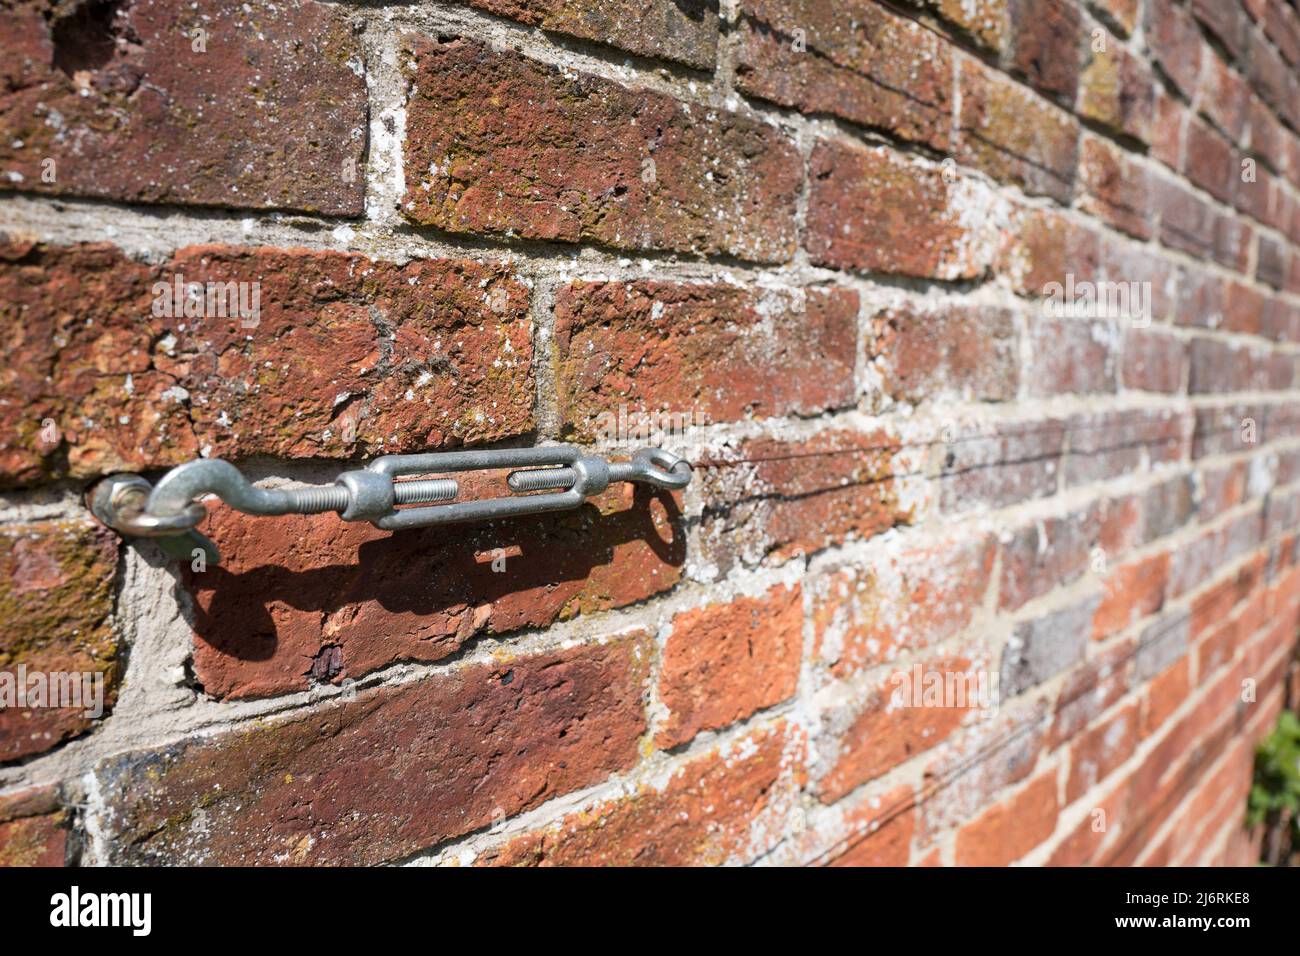 Standard galvanised steel Turnbuckle with hook and shackle attached to a brick wall with wire attached. Stock Photo